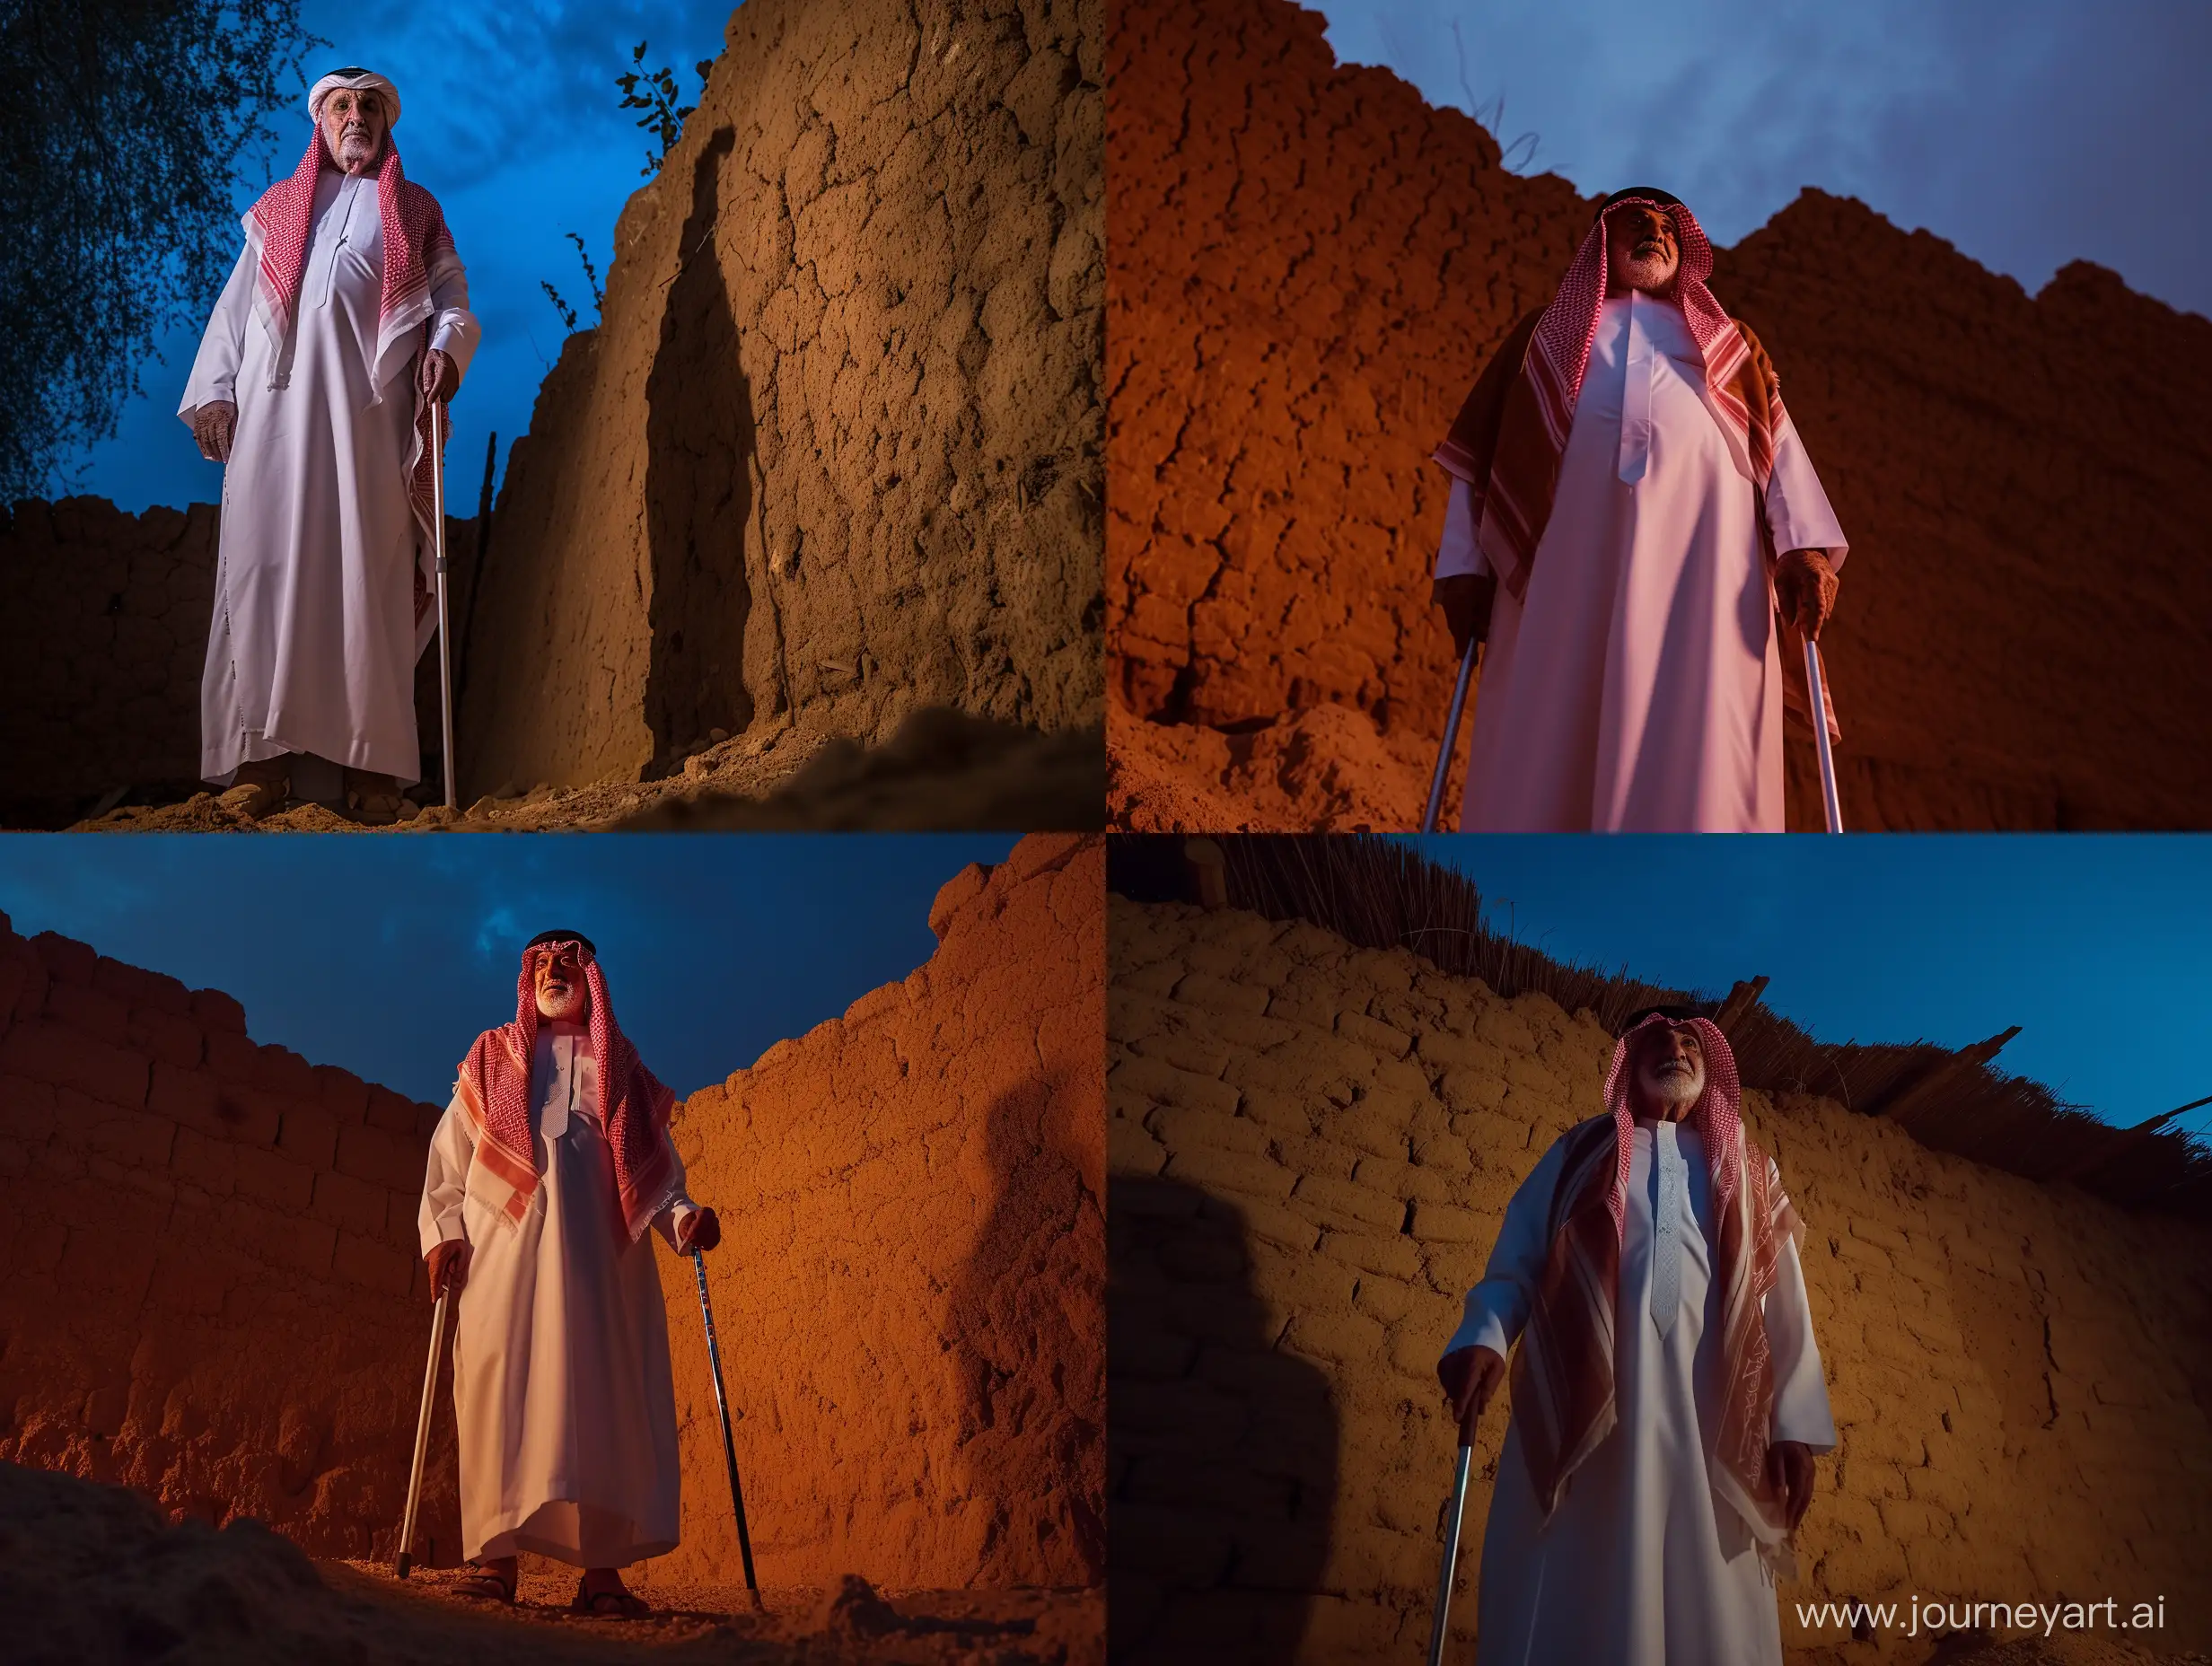 An opening photo of an old Saudi prince wearing the traditional white Saudi dress and a red shemagh, standing in front of a mud wall holding his cane at night time and dim lighting, cinematic and dramatic style with brown tones, and he appears confident, the camera is at a low angle pointing upwards, the sky is blue, and a full-body shot, Landscape, shot by‎‏ Sony PXW-FS5 XDCAM Super 35,